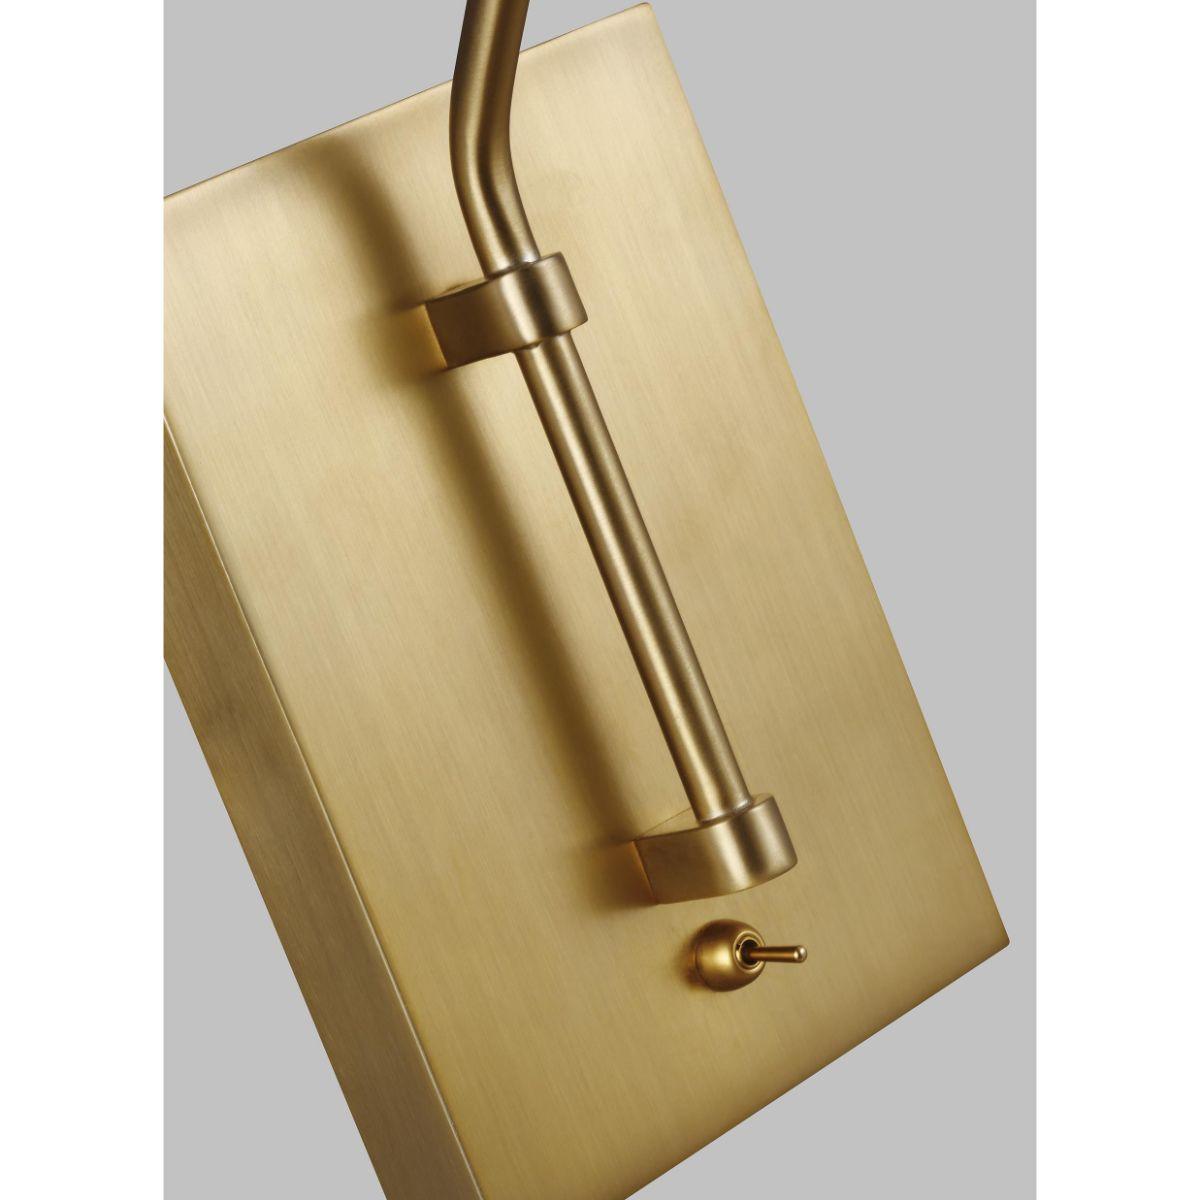 Simon 24 in. Armed Sconce